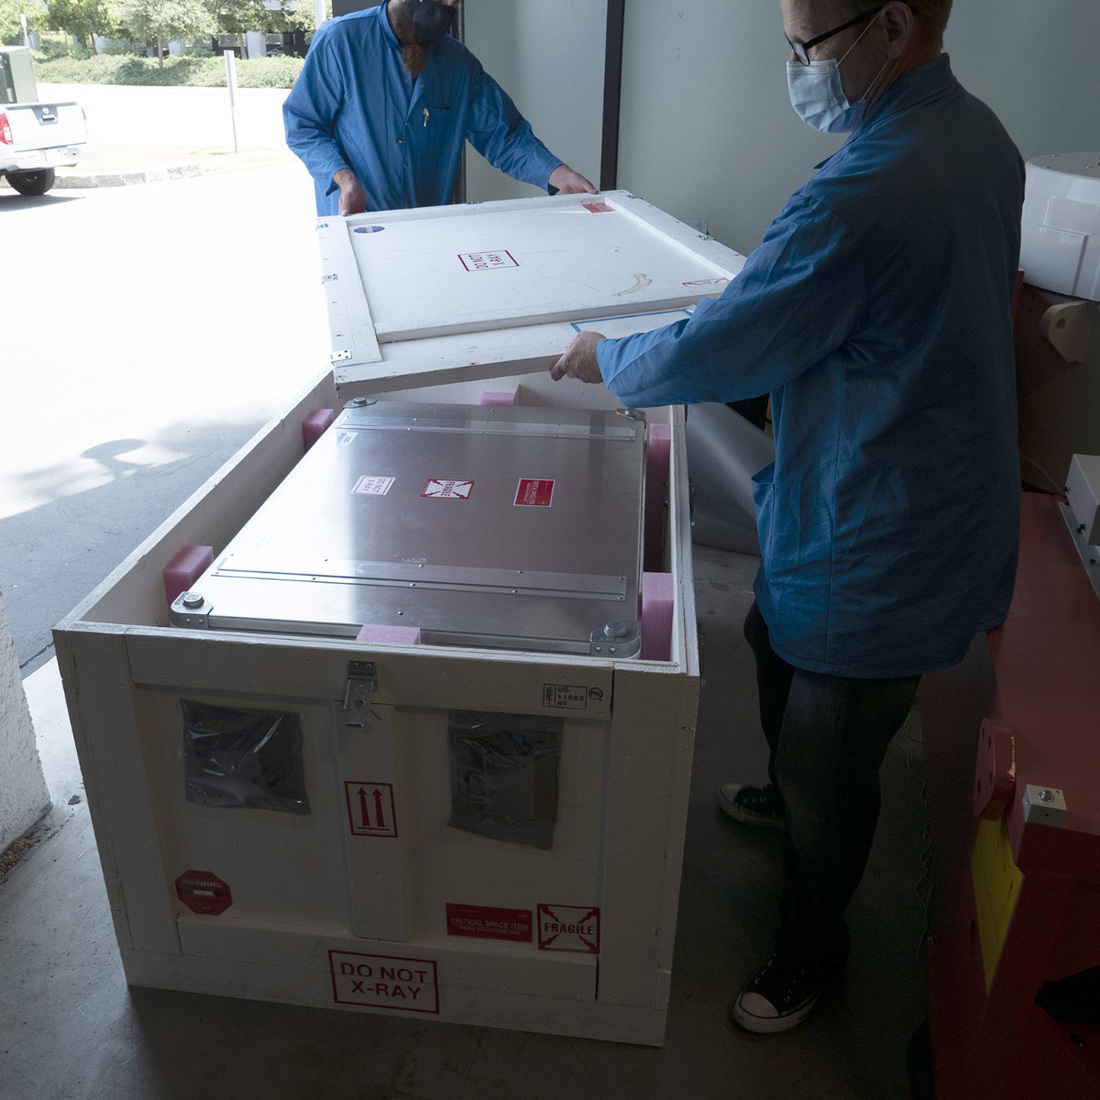 Photo of the ShadowCam container getting placed into a padded, heavy wooden box prior to being loaded into the shipping van.